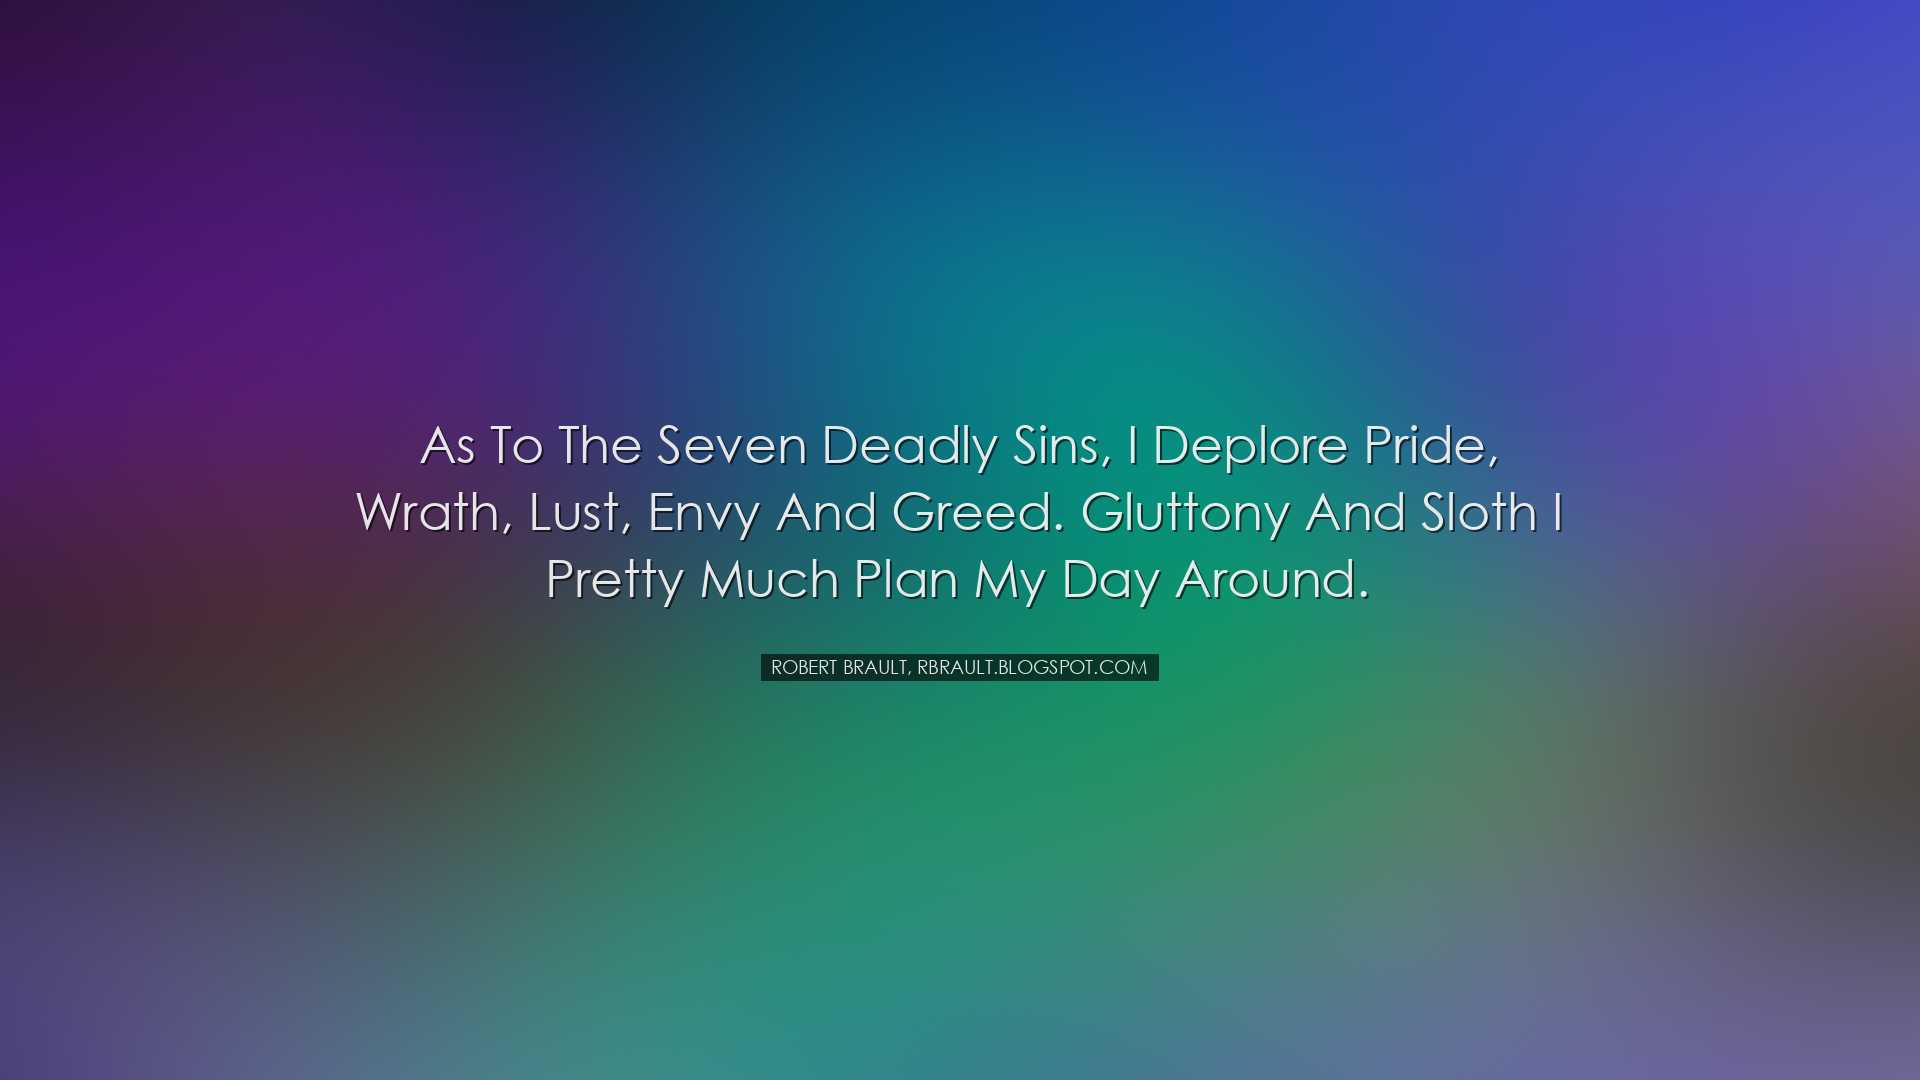 As to the Seven Deadly Sins, I deplore Pride, Wrath, Lust, Envy an